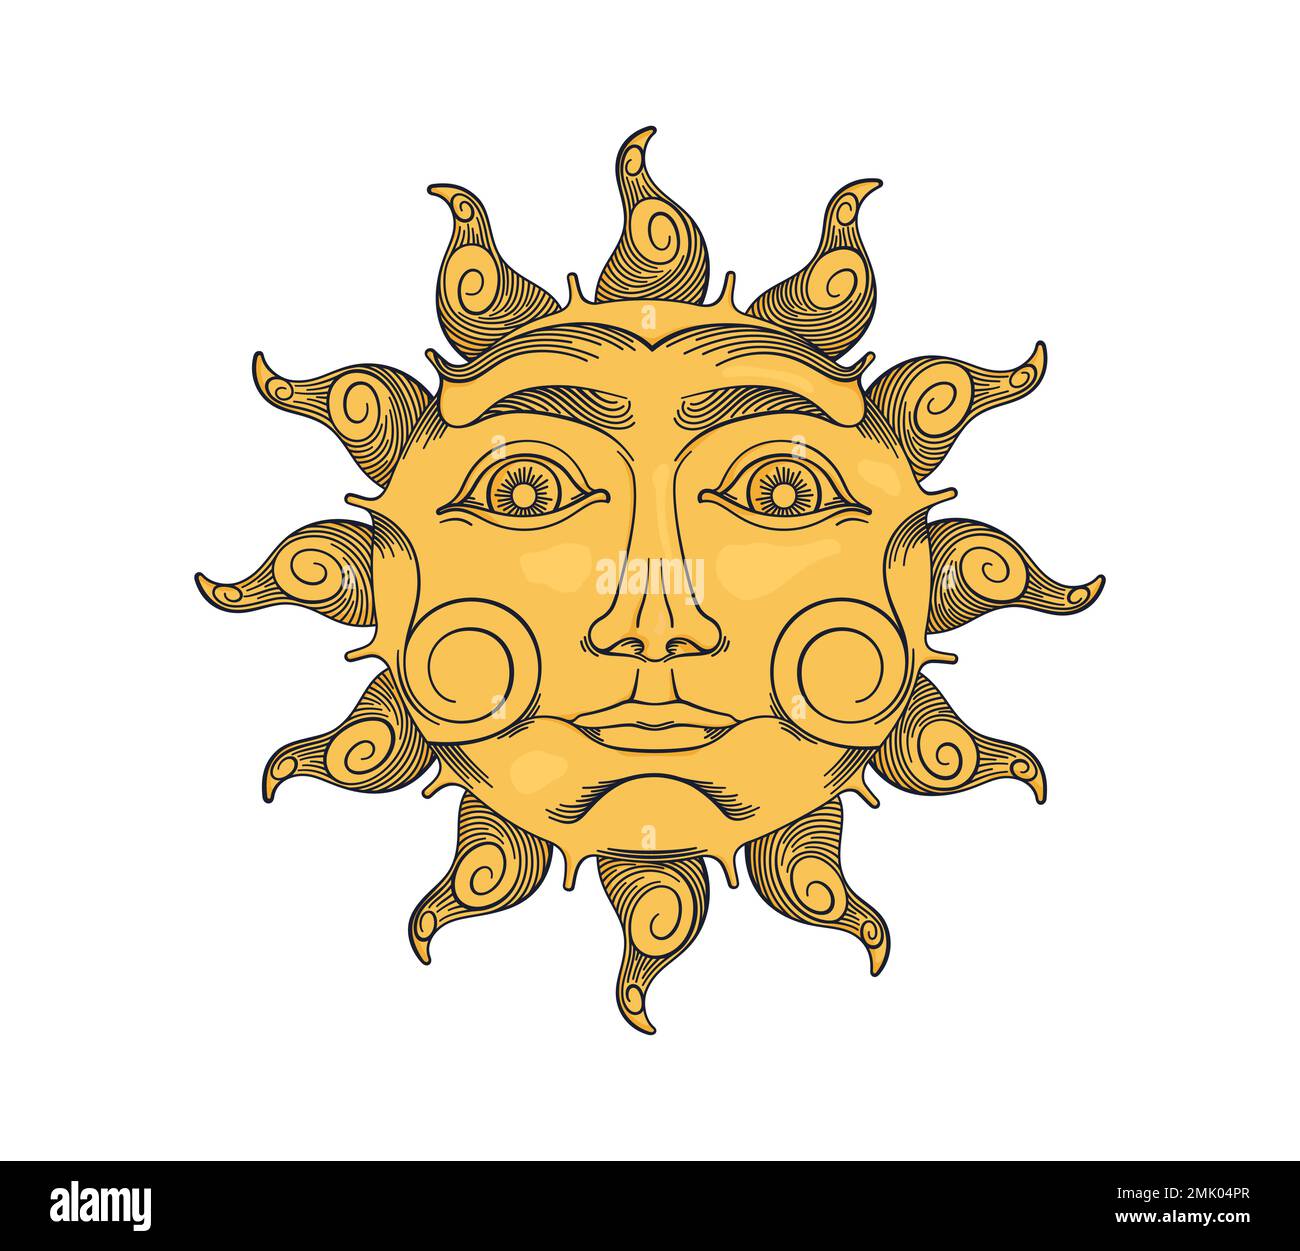 Sun with a face. Engraving drawing technique. Vintage astronomy illustration. Vector design elements Stock Vector